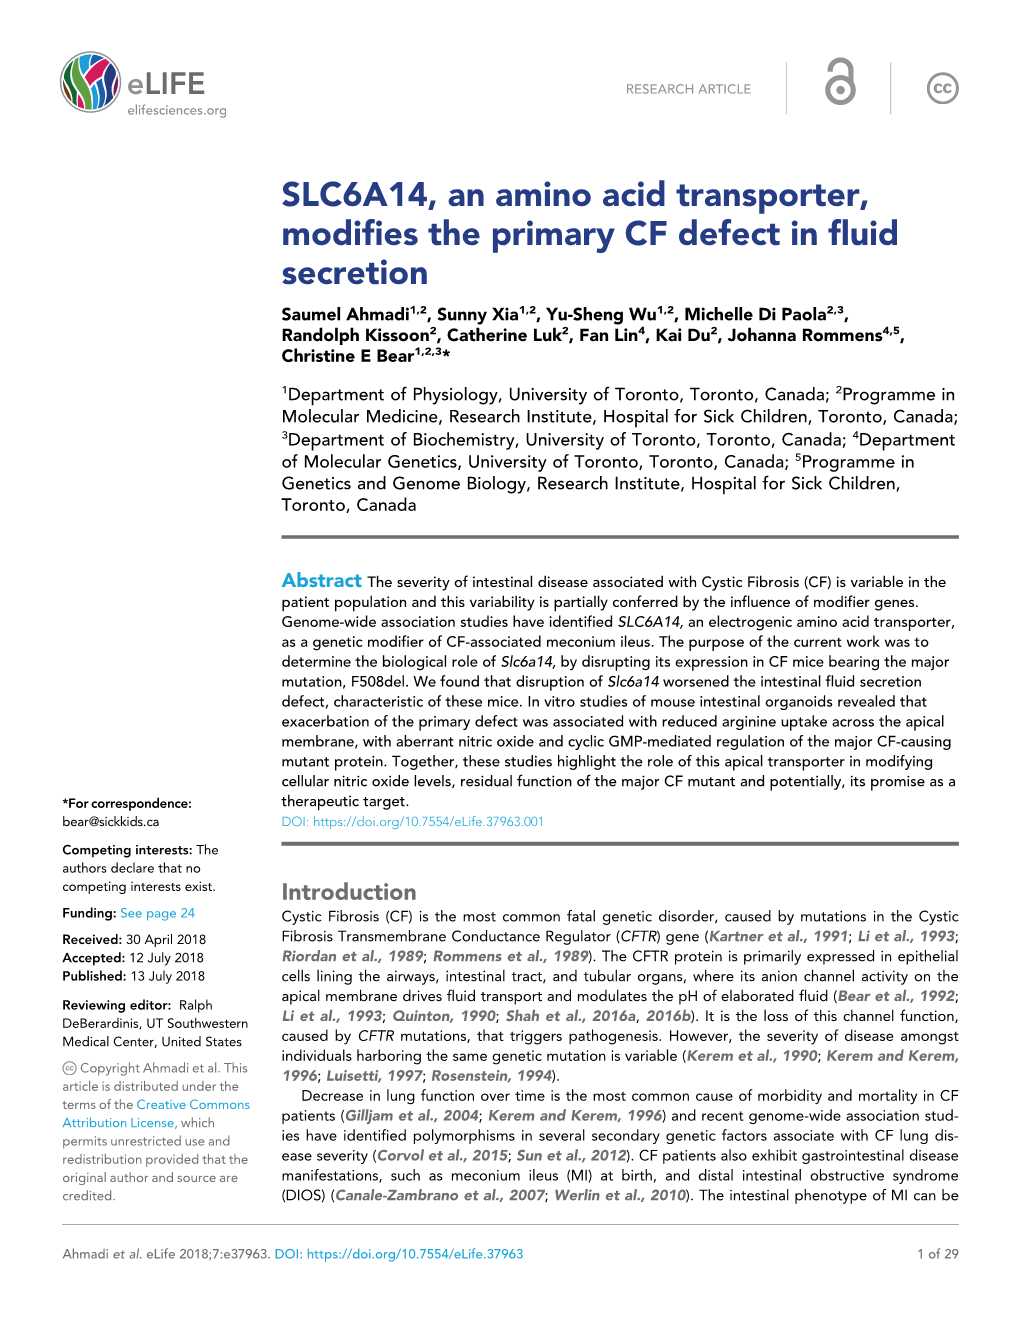 SLC6A14, an Amino Acid Transporter, Modifies the Primary CF Defect In